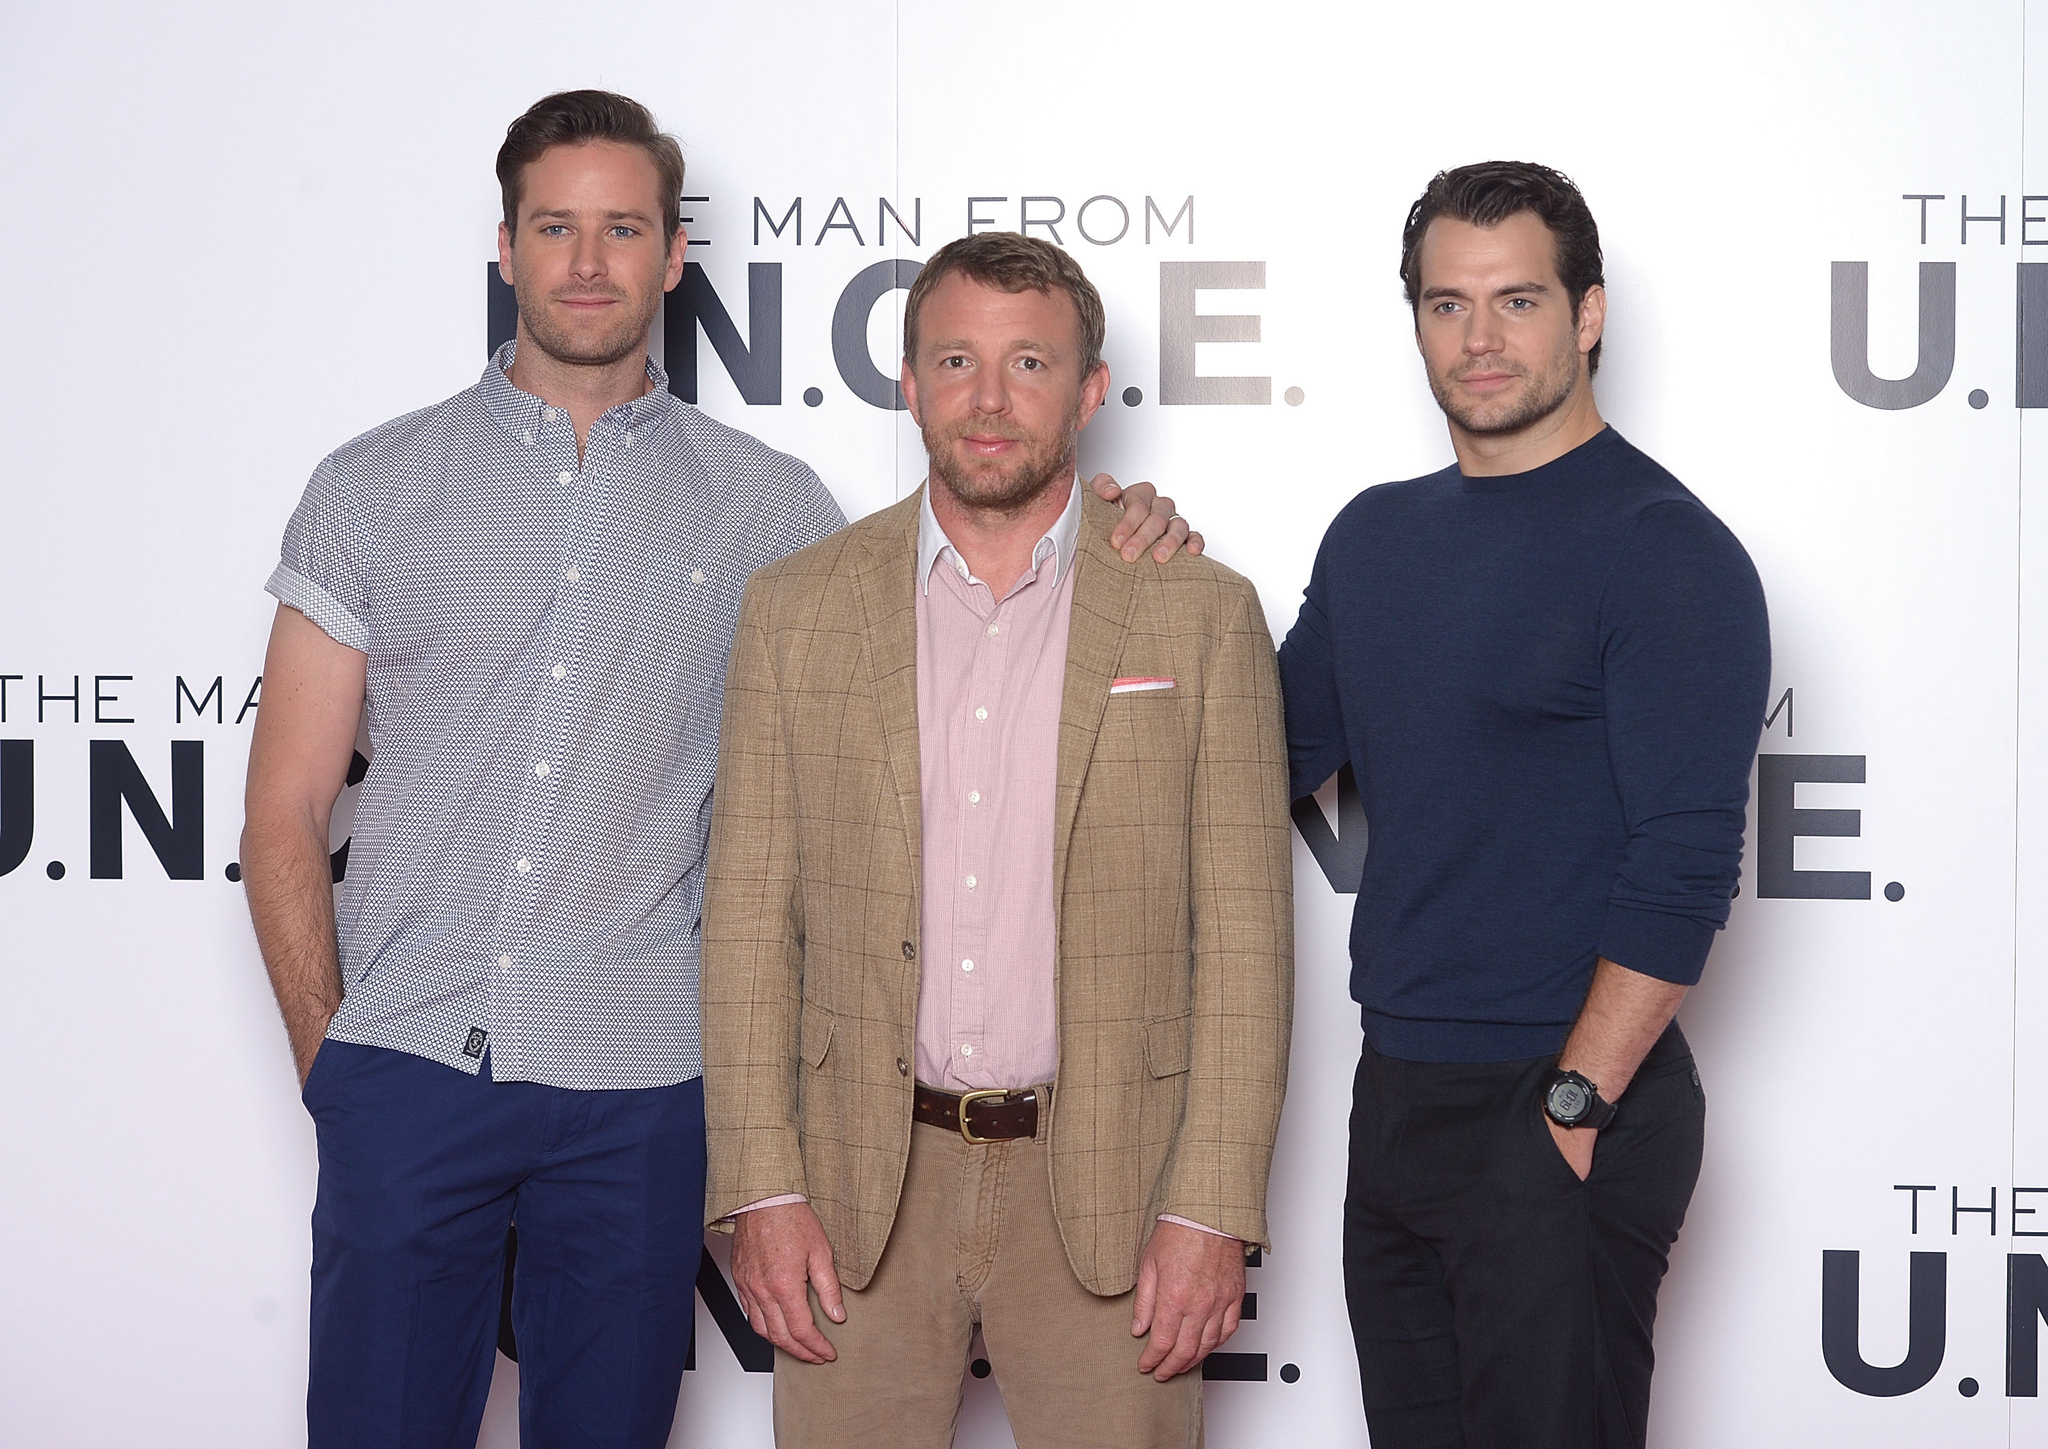 Guy Ritchie, Henry Cavill and Armie Hammer at event of Snipas is U.N.C.L.E. (2015)